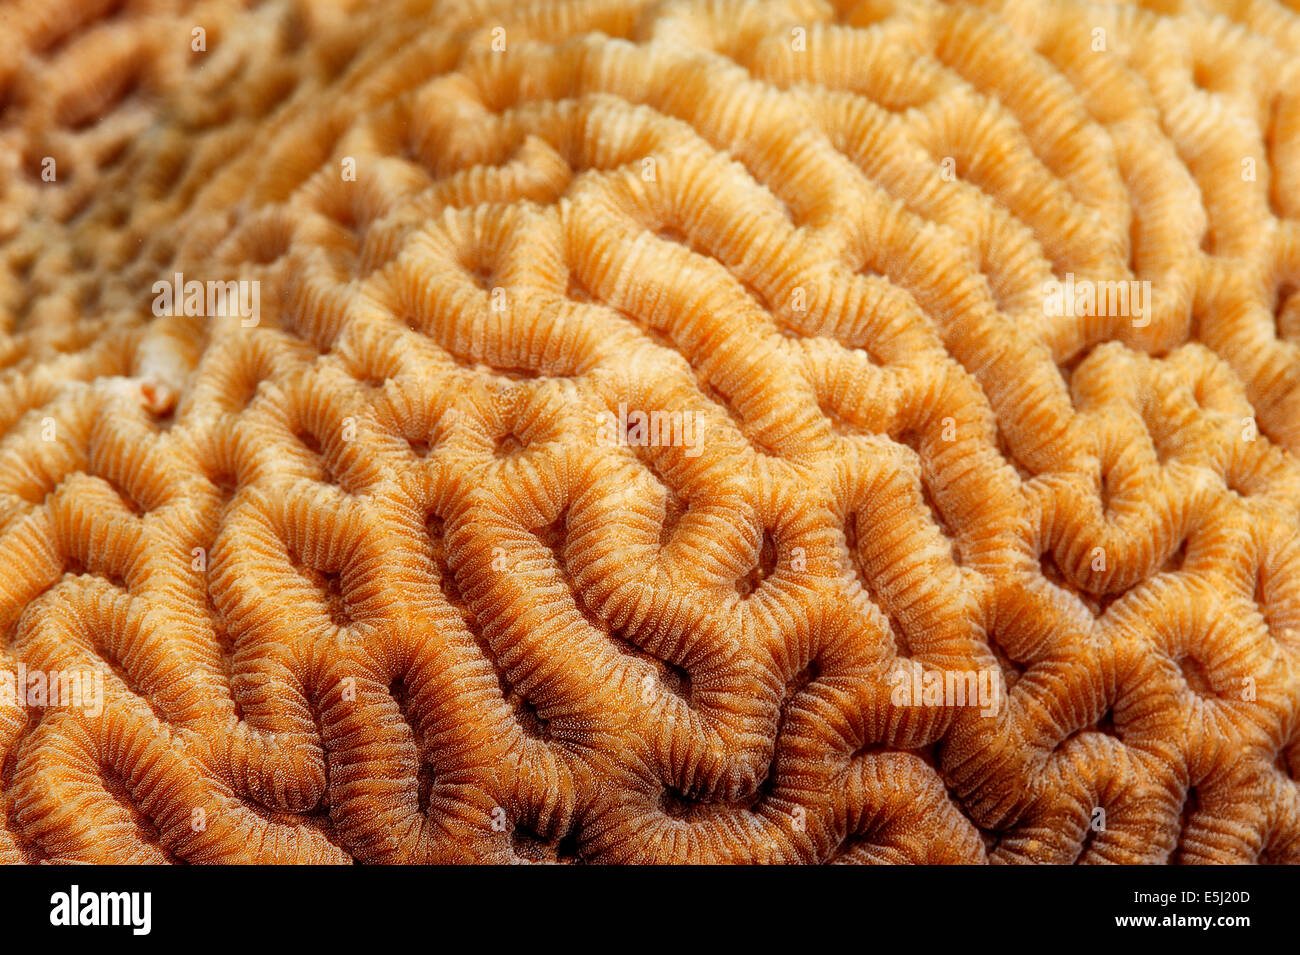 Detail of Platygyra sp. coral in the Red Sea off Sudan coast Stock Photo